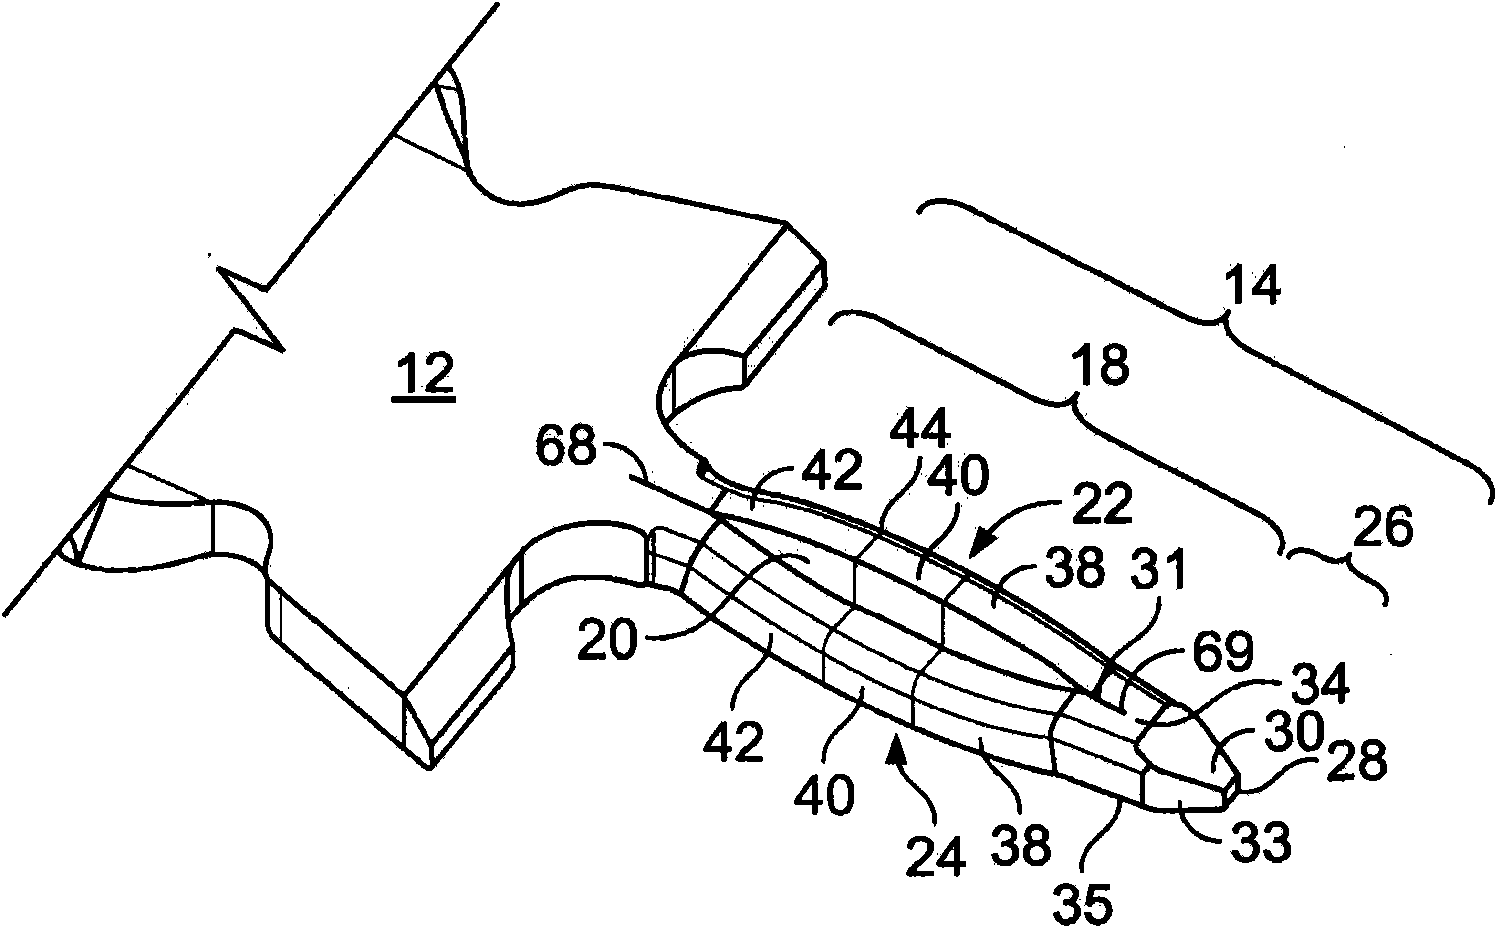 Electrical connector having improved electrical characteristics